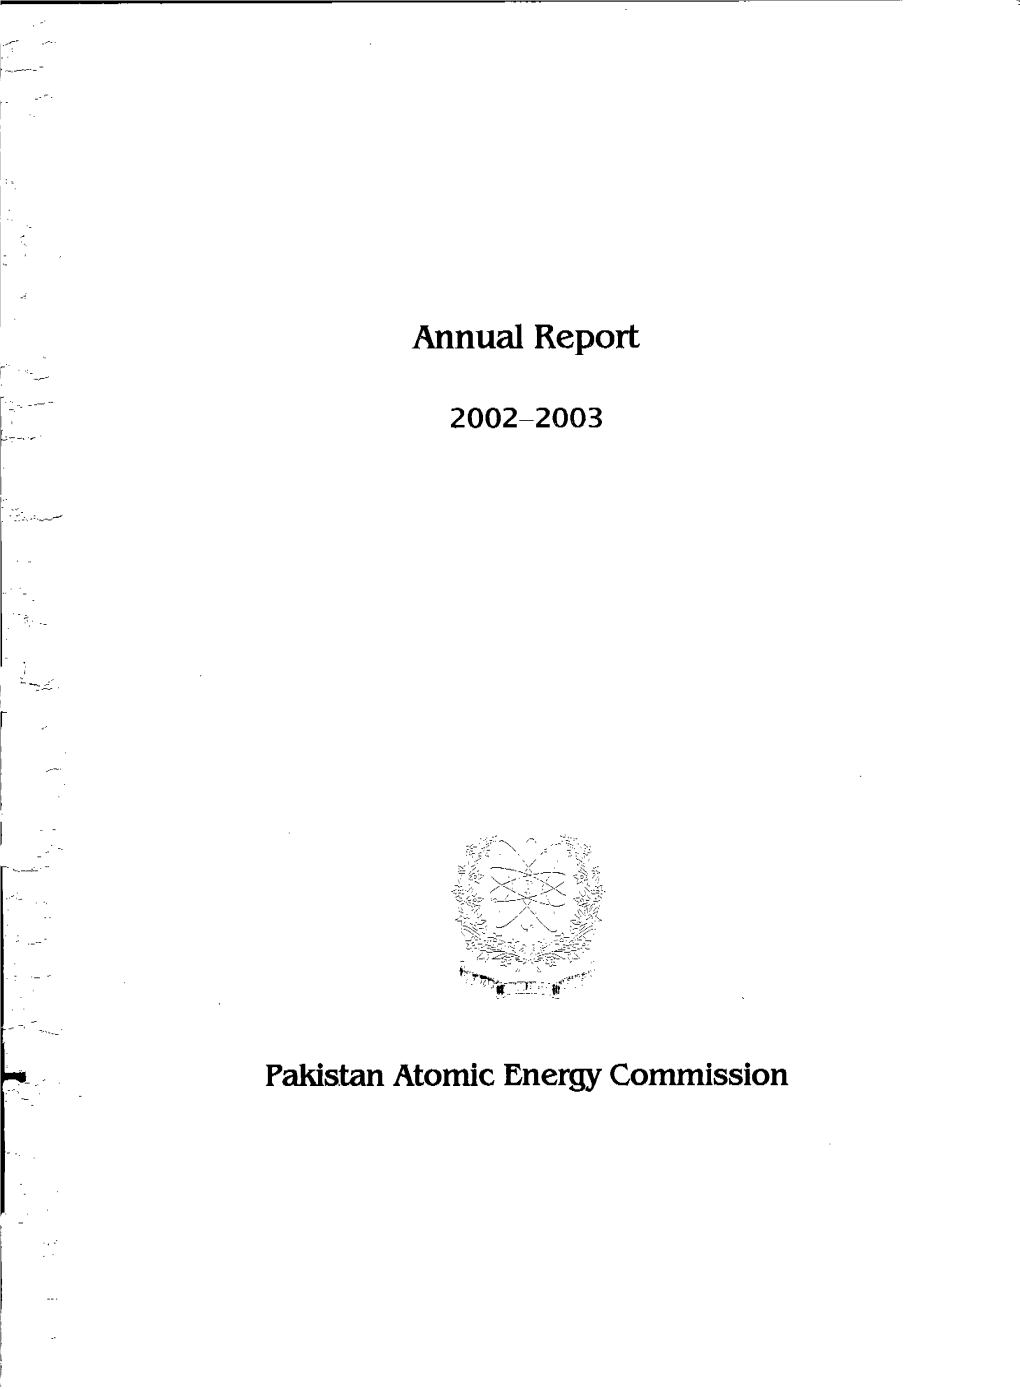 Annual Report Pakistan Atomic Energy Commission